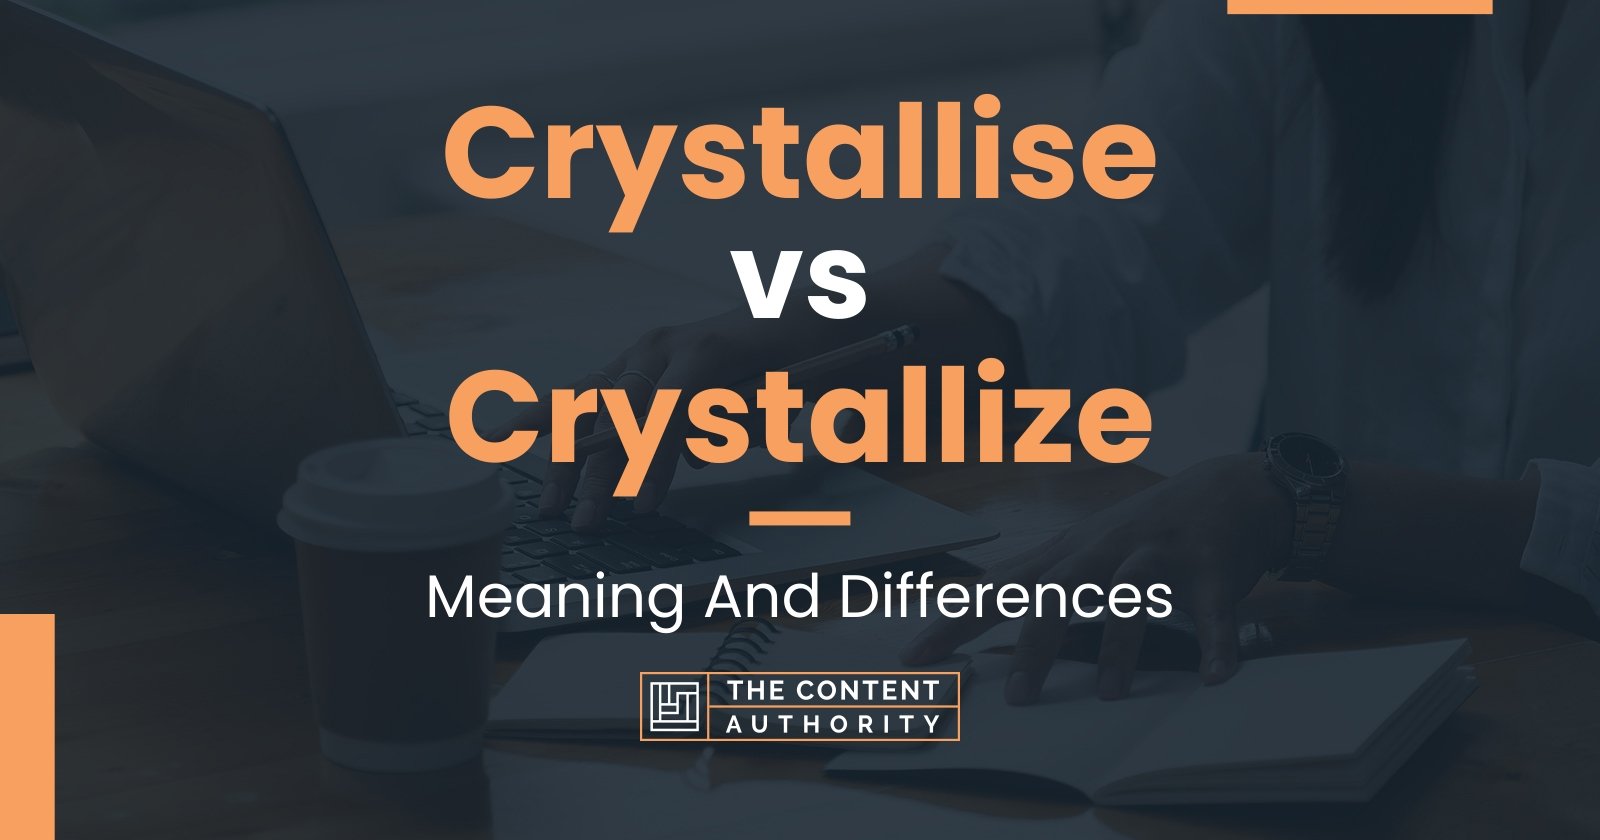 Crystallise vs Crystallize: Meaning And Differences